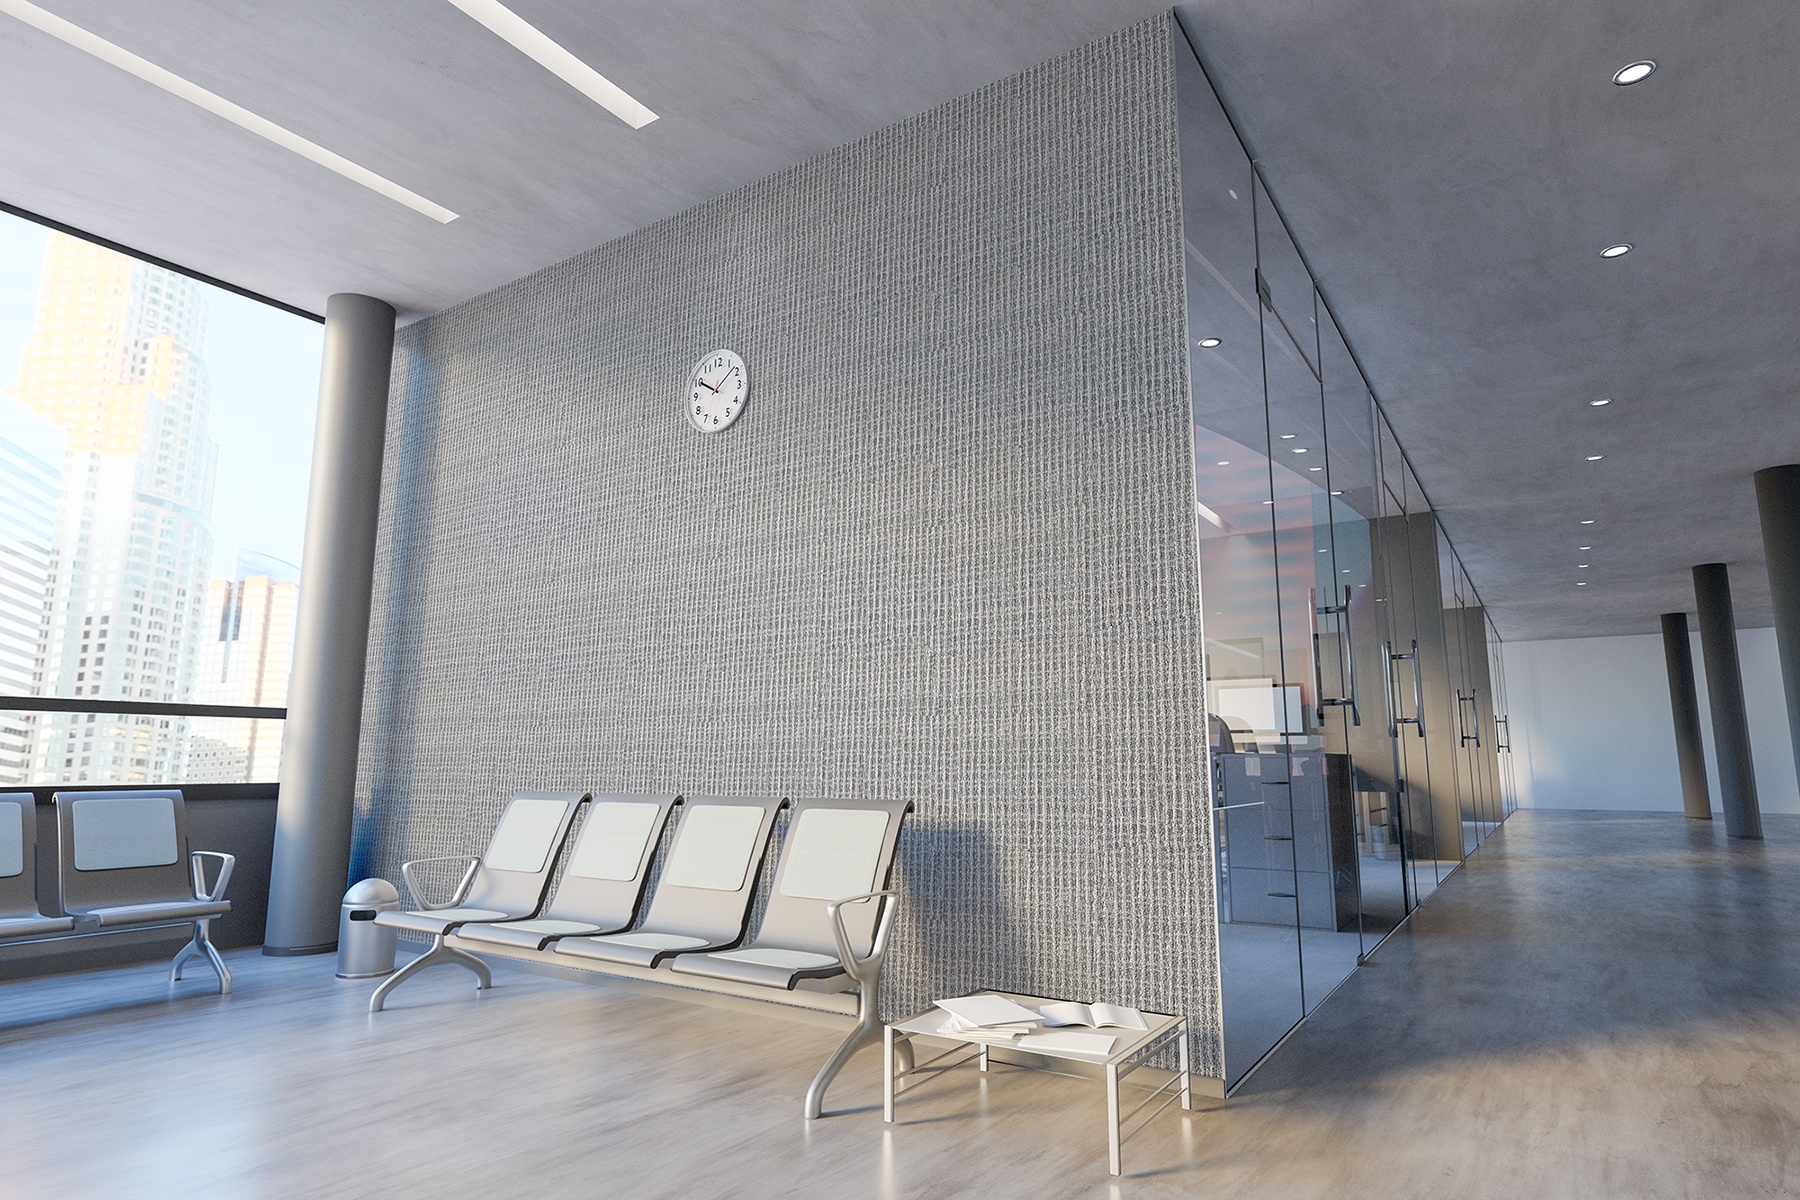 Office wallpaper in your commercial interior design